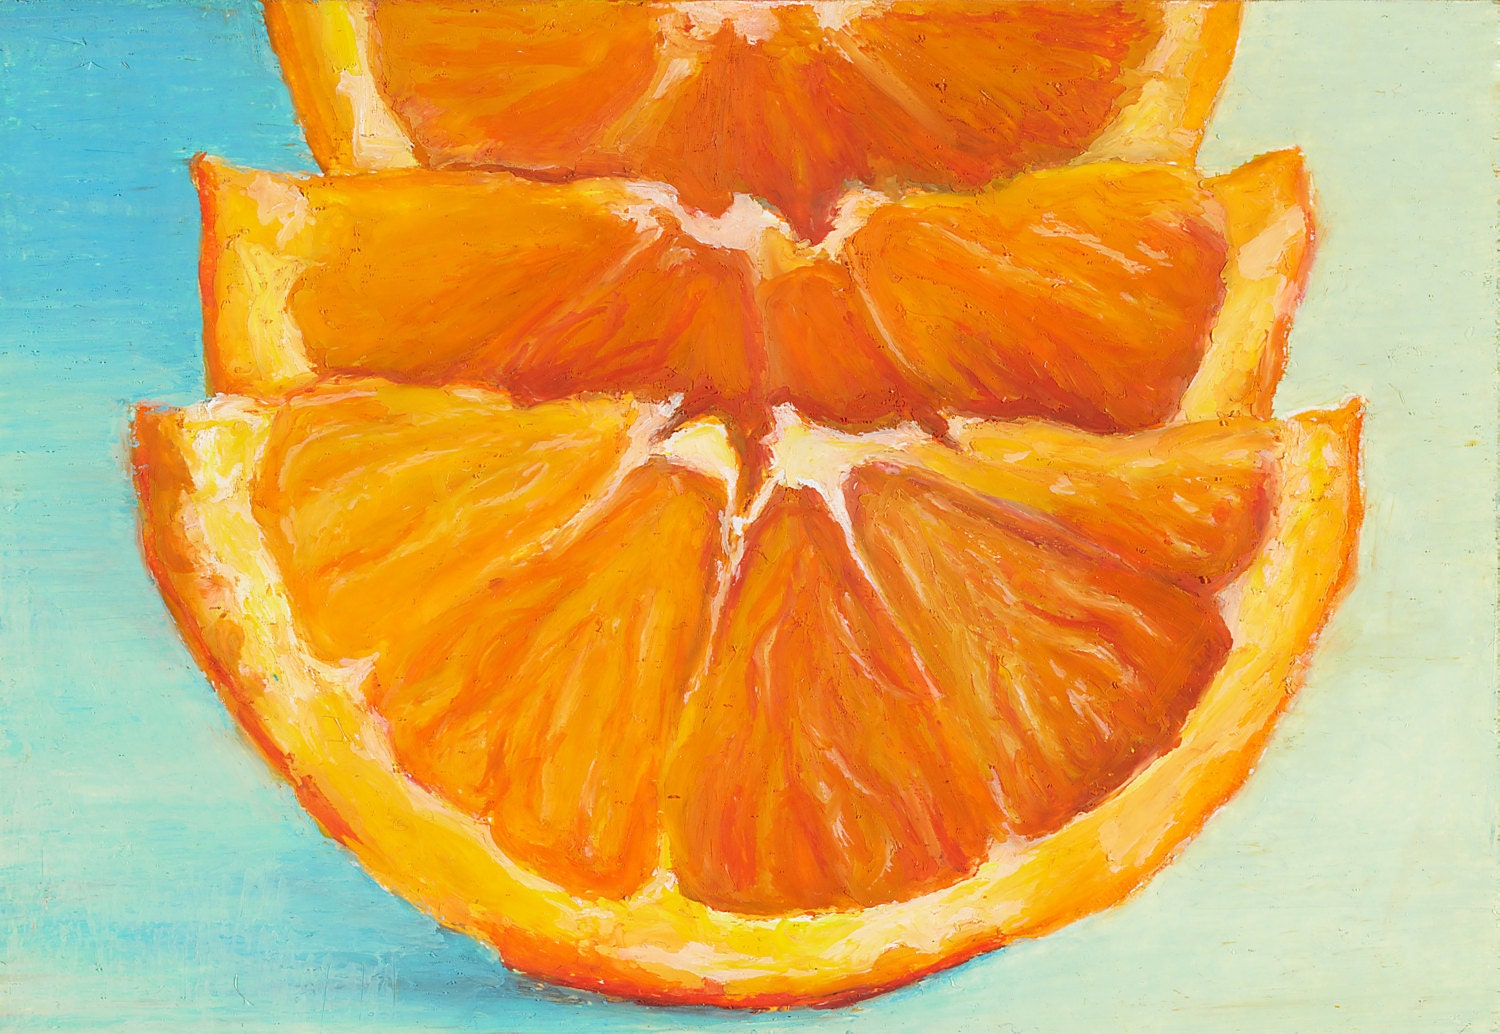 Giclee, Archival, Matted Print of an Original Oil Pastel Painting of Orange Slices - brookefiger